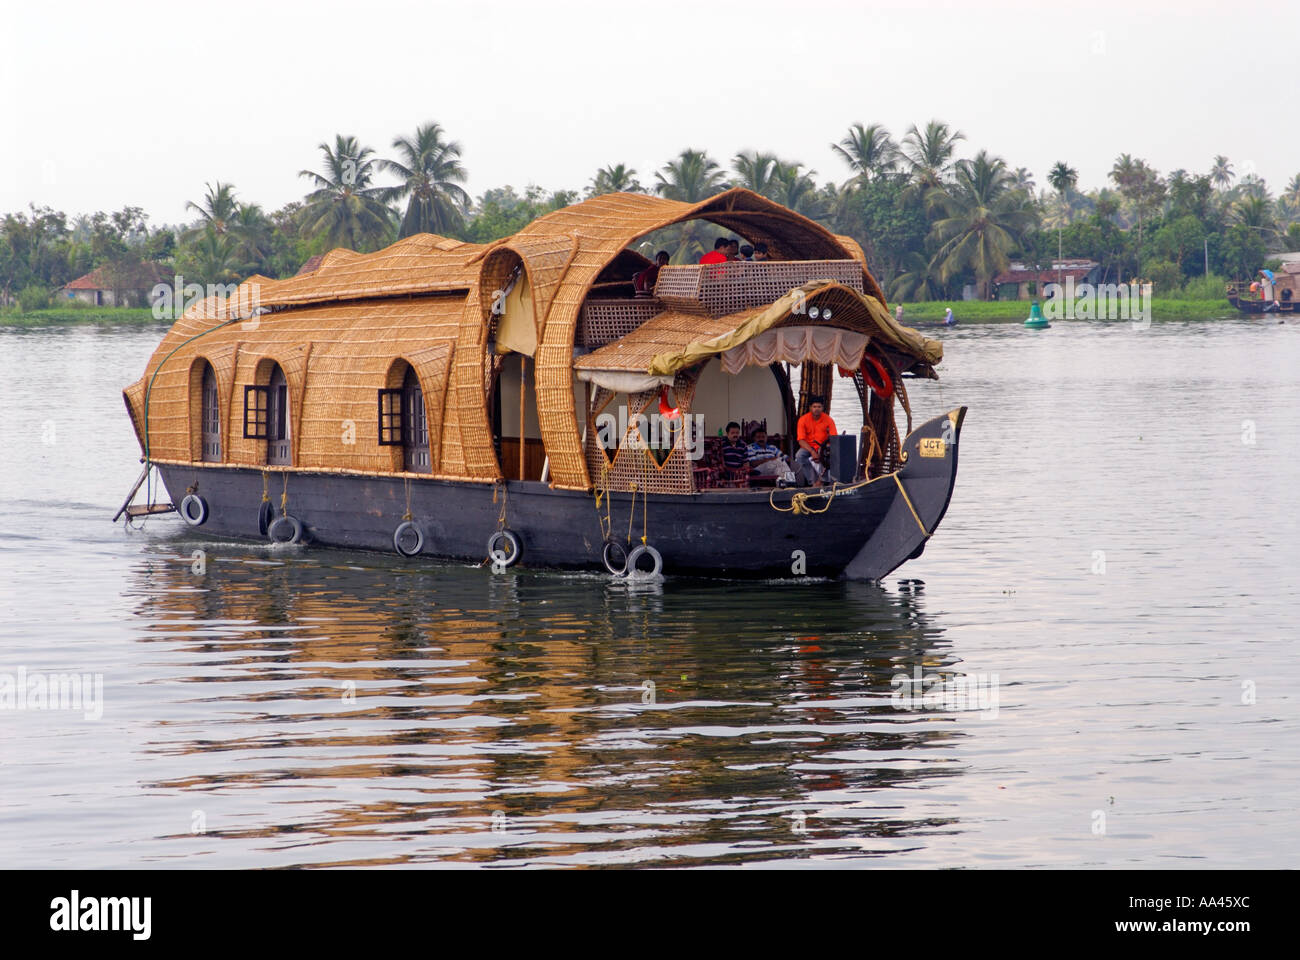 A Traditional Rice Boat On The Kerala Backwaters Stock Photo Alamy